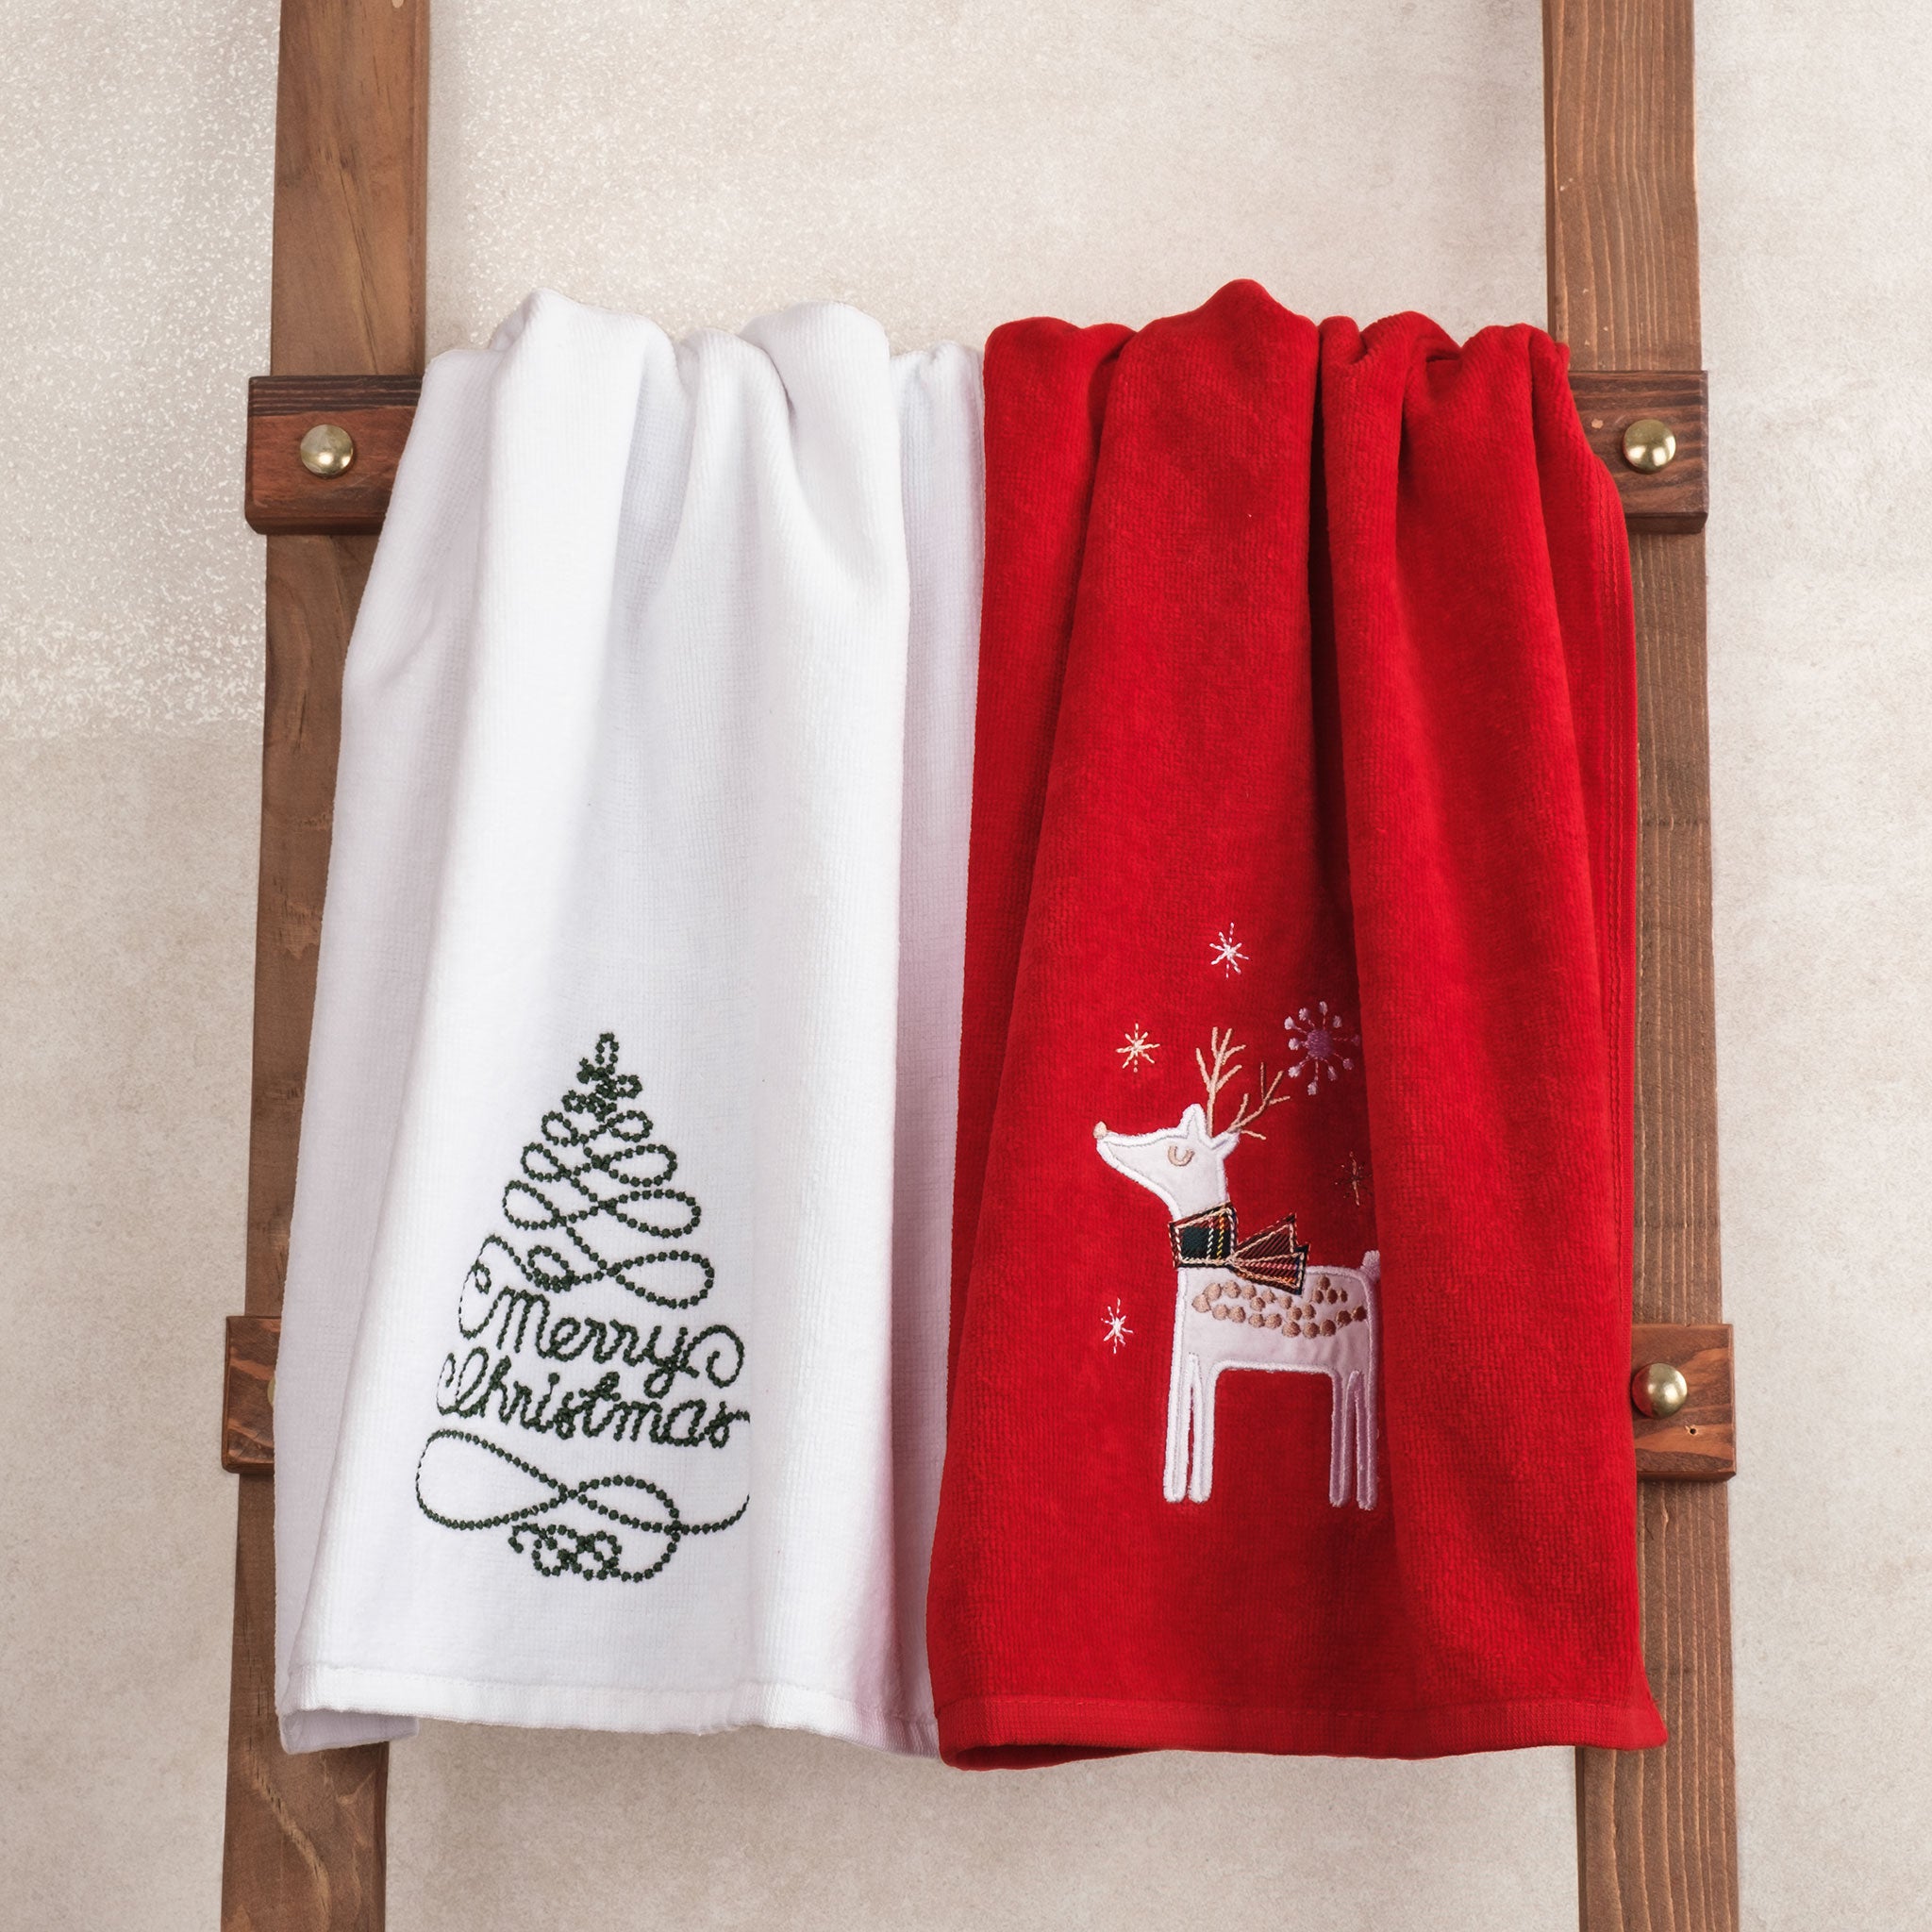 American Soft Linen - Christmas Towels 2 Packed Embroidered Towels for Decor Xmas - Merry Tree-Deery - 1